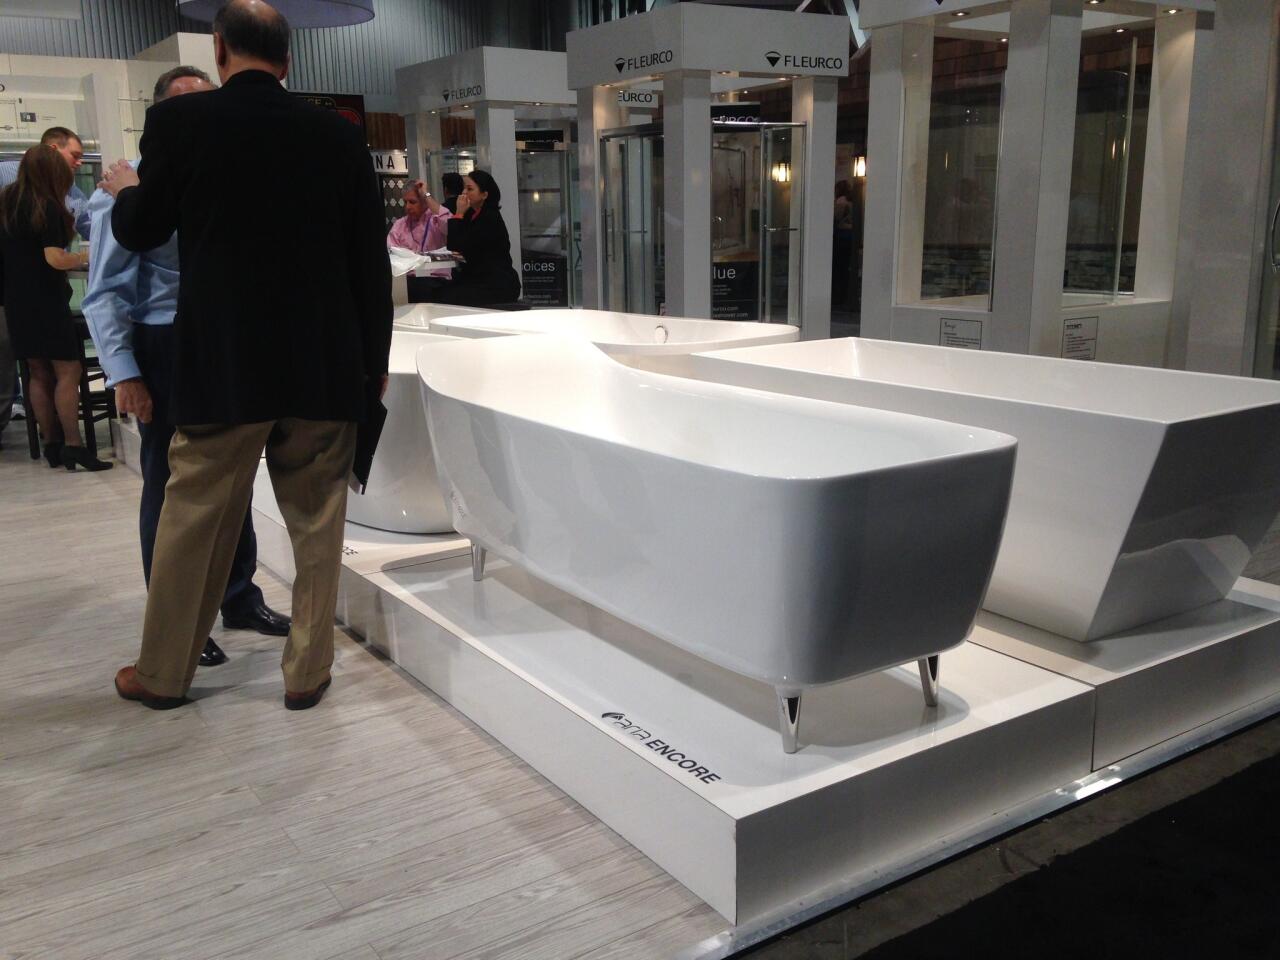 Free-standing tubs are gaining popularity among homeowners, while jetted tubs are losing favor.